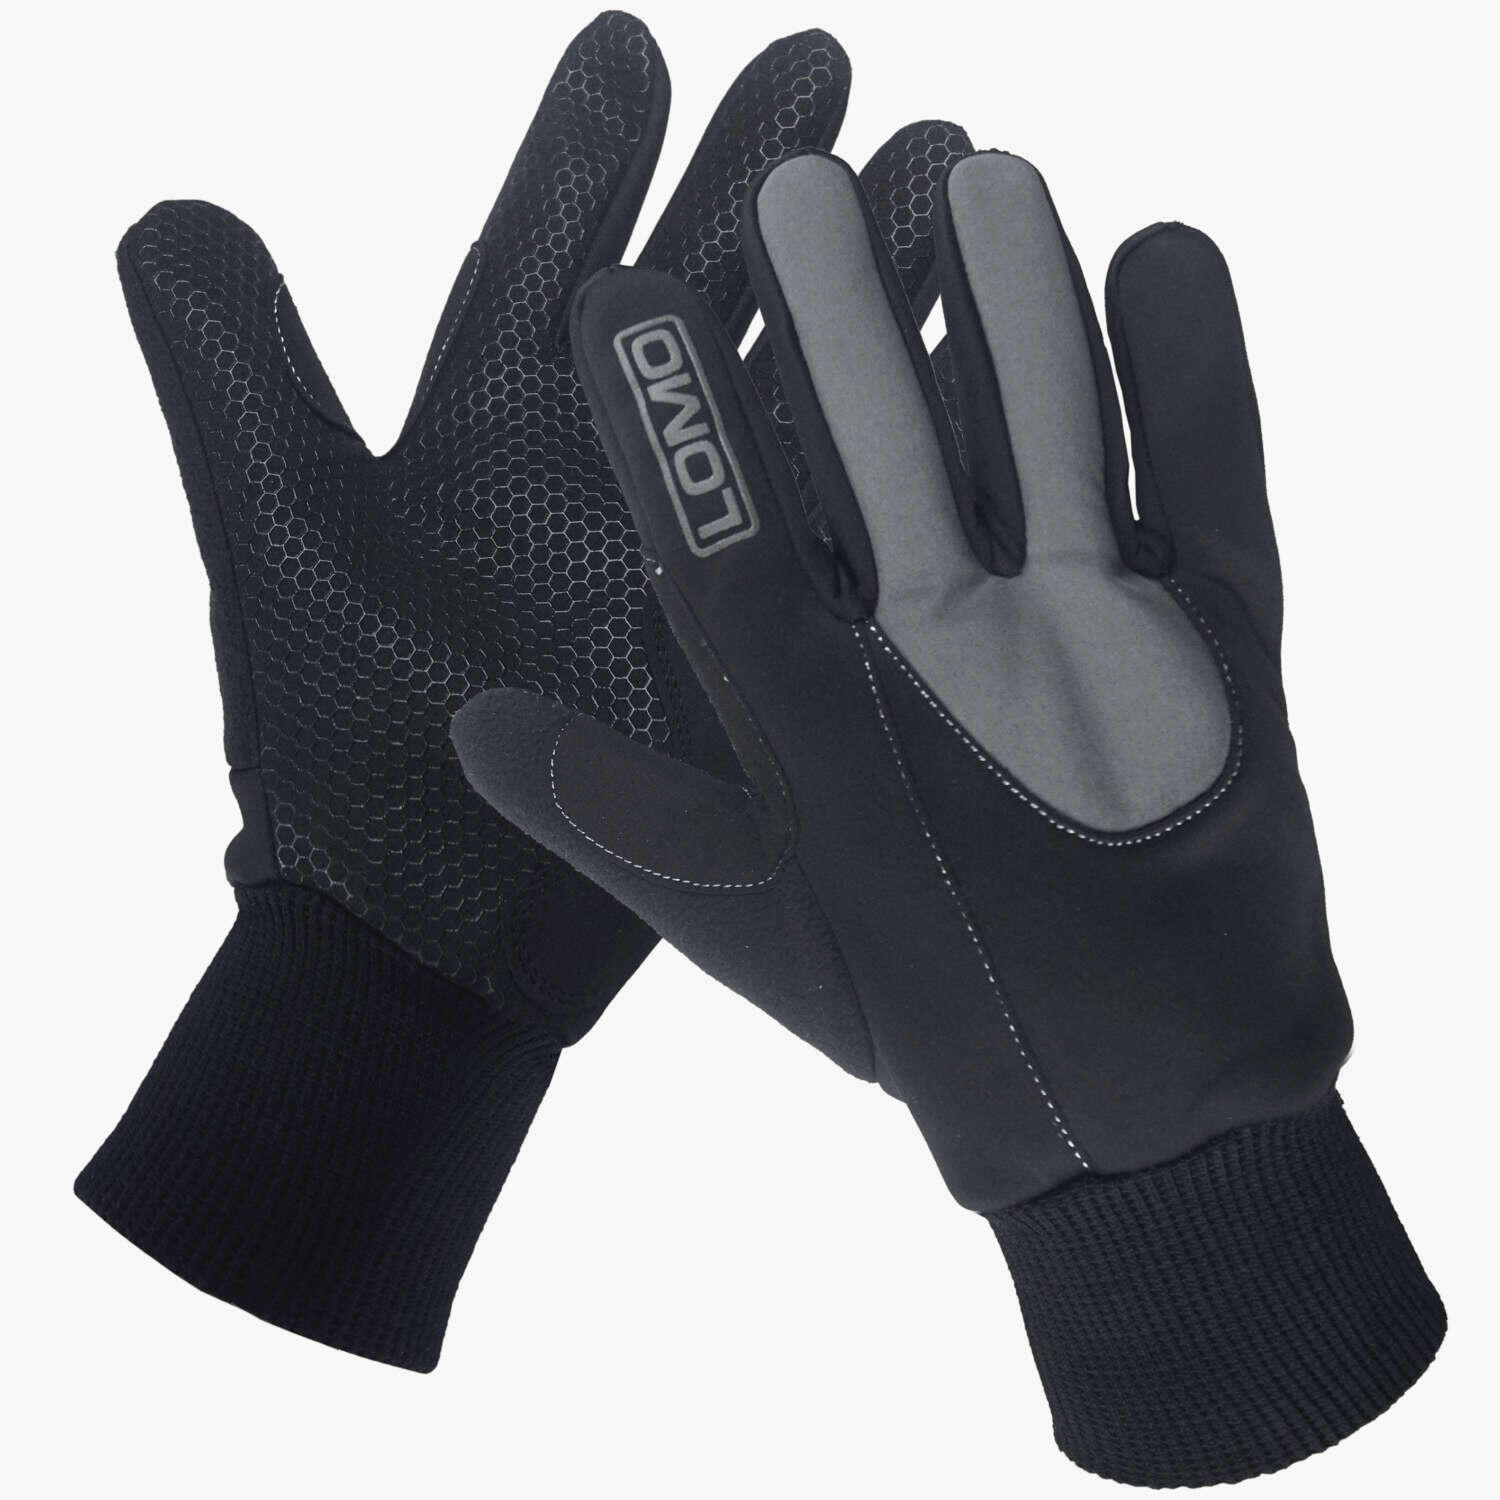 Lomo Winter Cycling Gloves 6/7